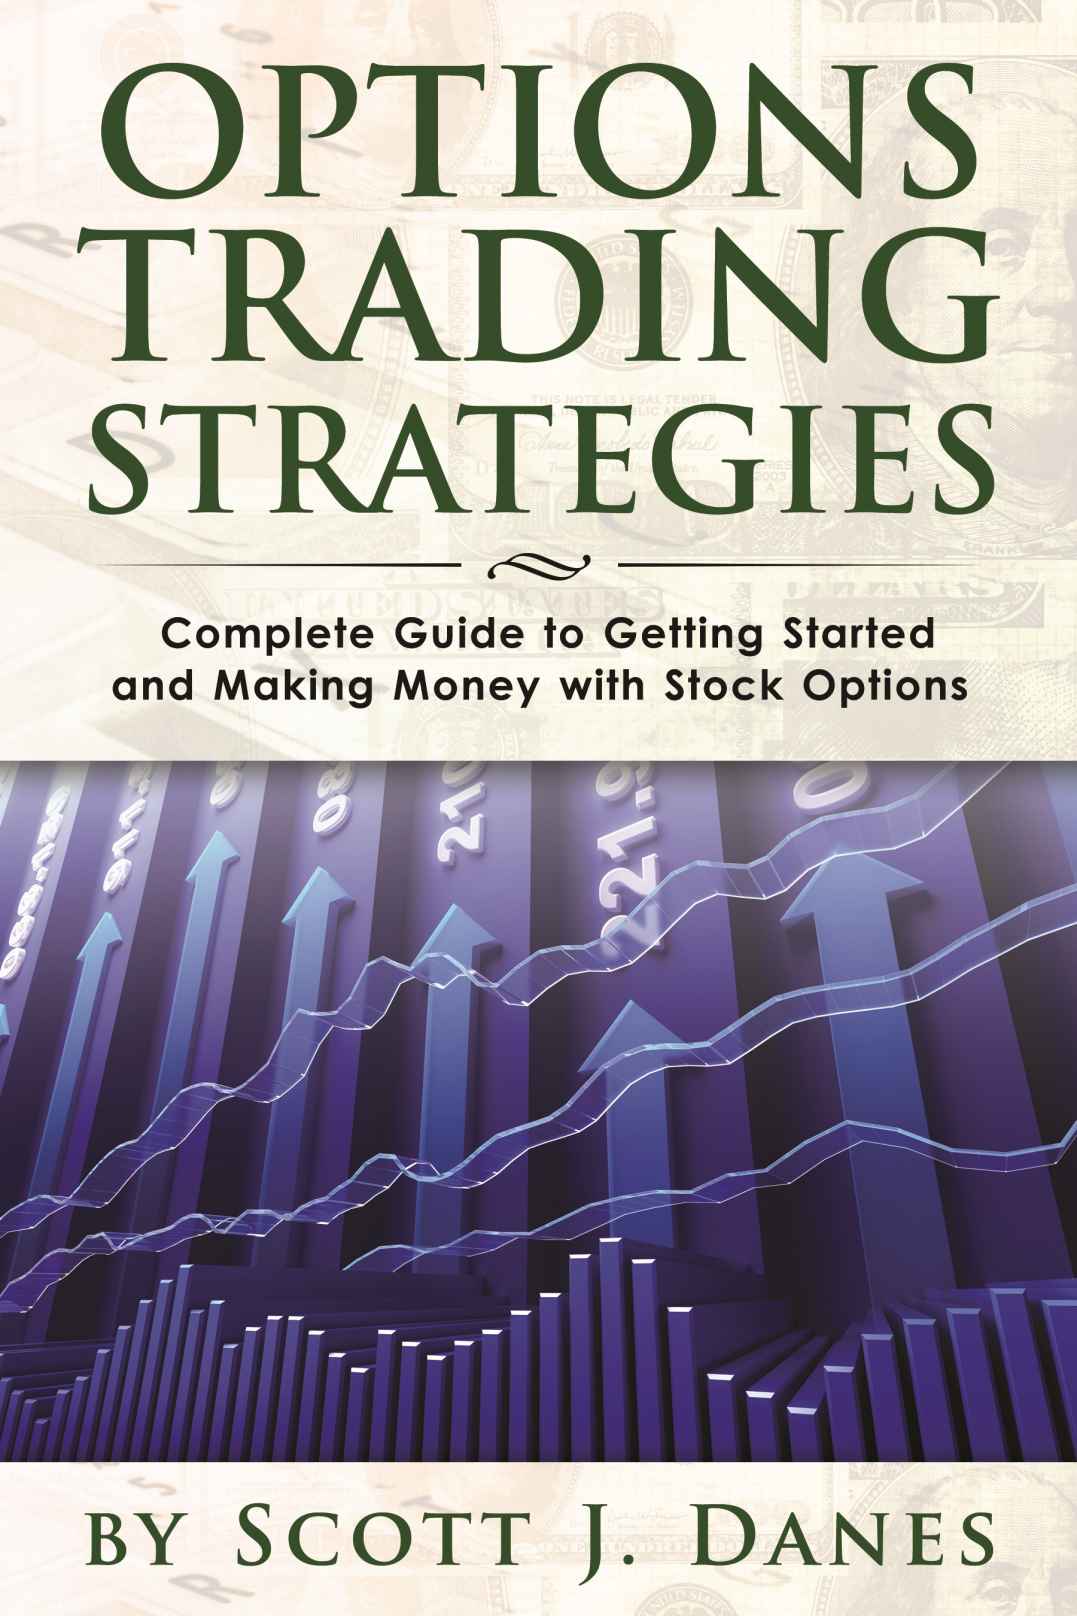 Options Trading Strategies: Complete Guide to Getting Started and Making Money with Stock Options (Options Trading, Options Strategies, Stock Option Trading)